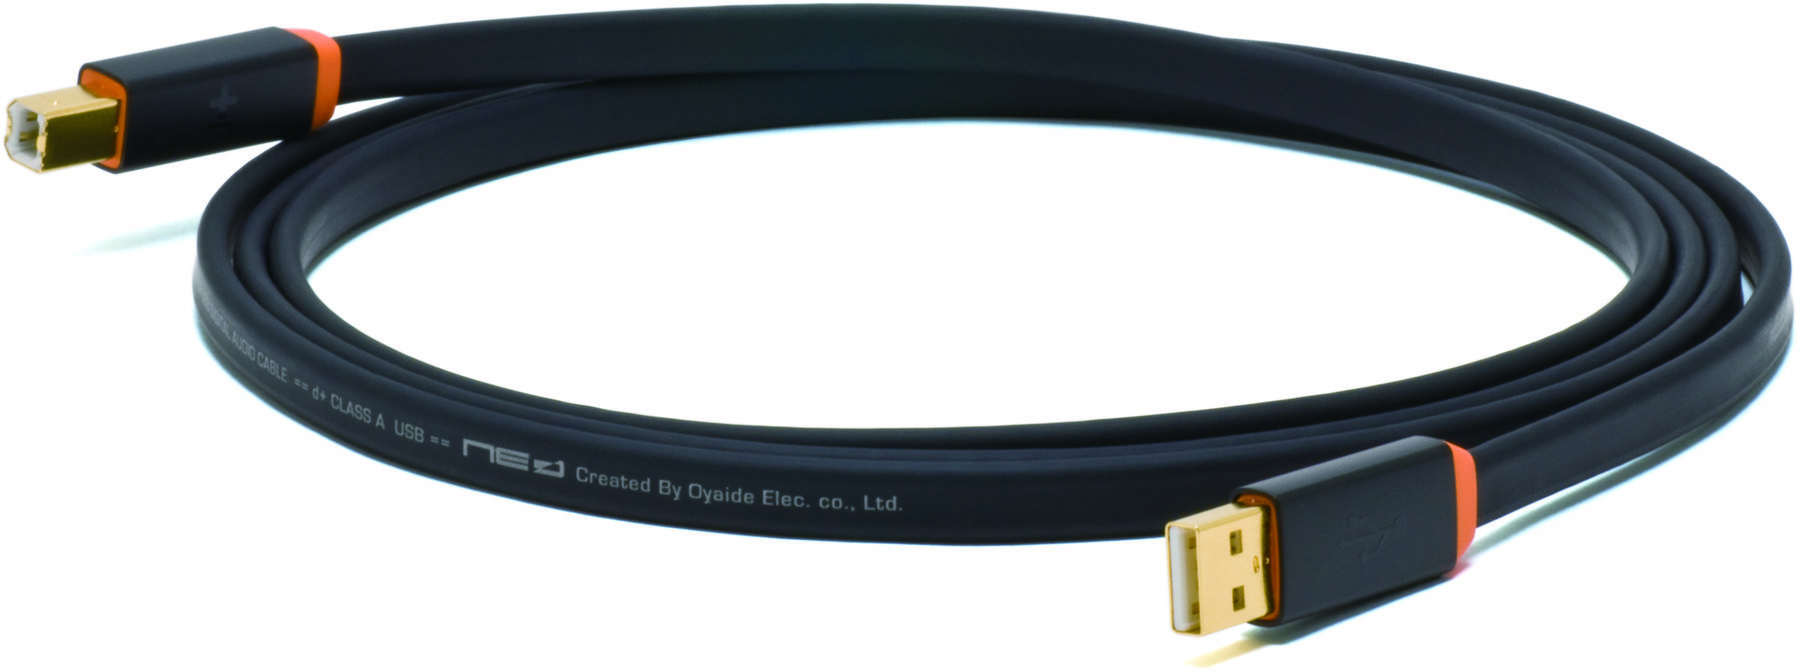 USB Cable Oyaide NEO d+ USB 2.0 Class A 2m